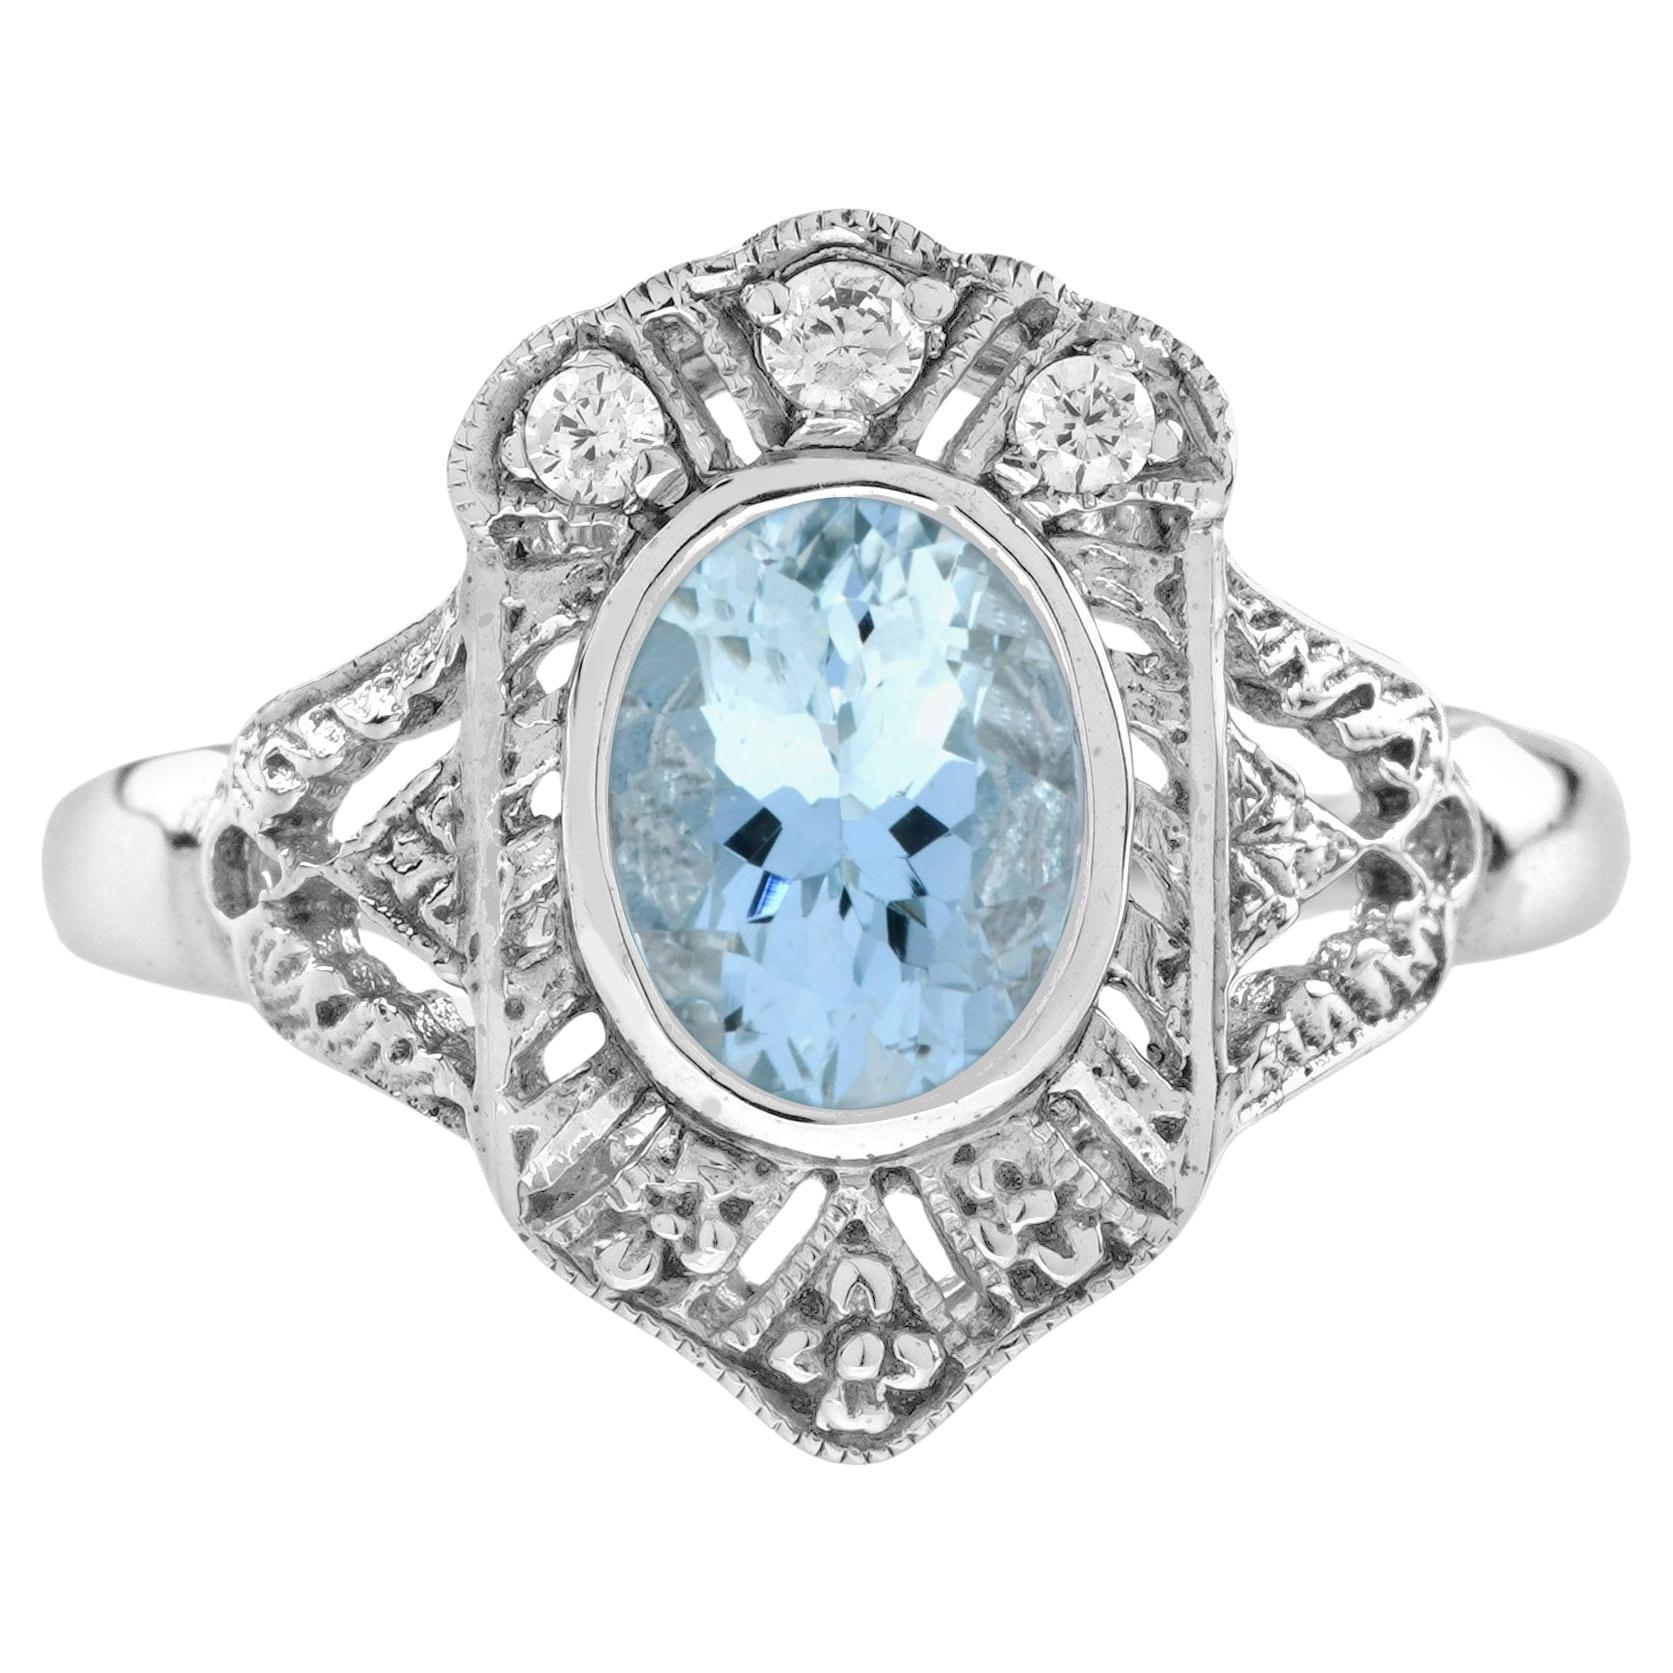 1.5 Ct. Aquamarine and Diamond Art Deco Style Engagement Ring in 14K White Gold For Sale